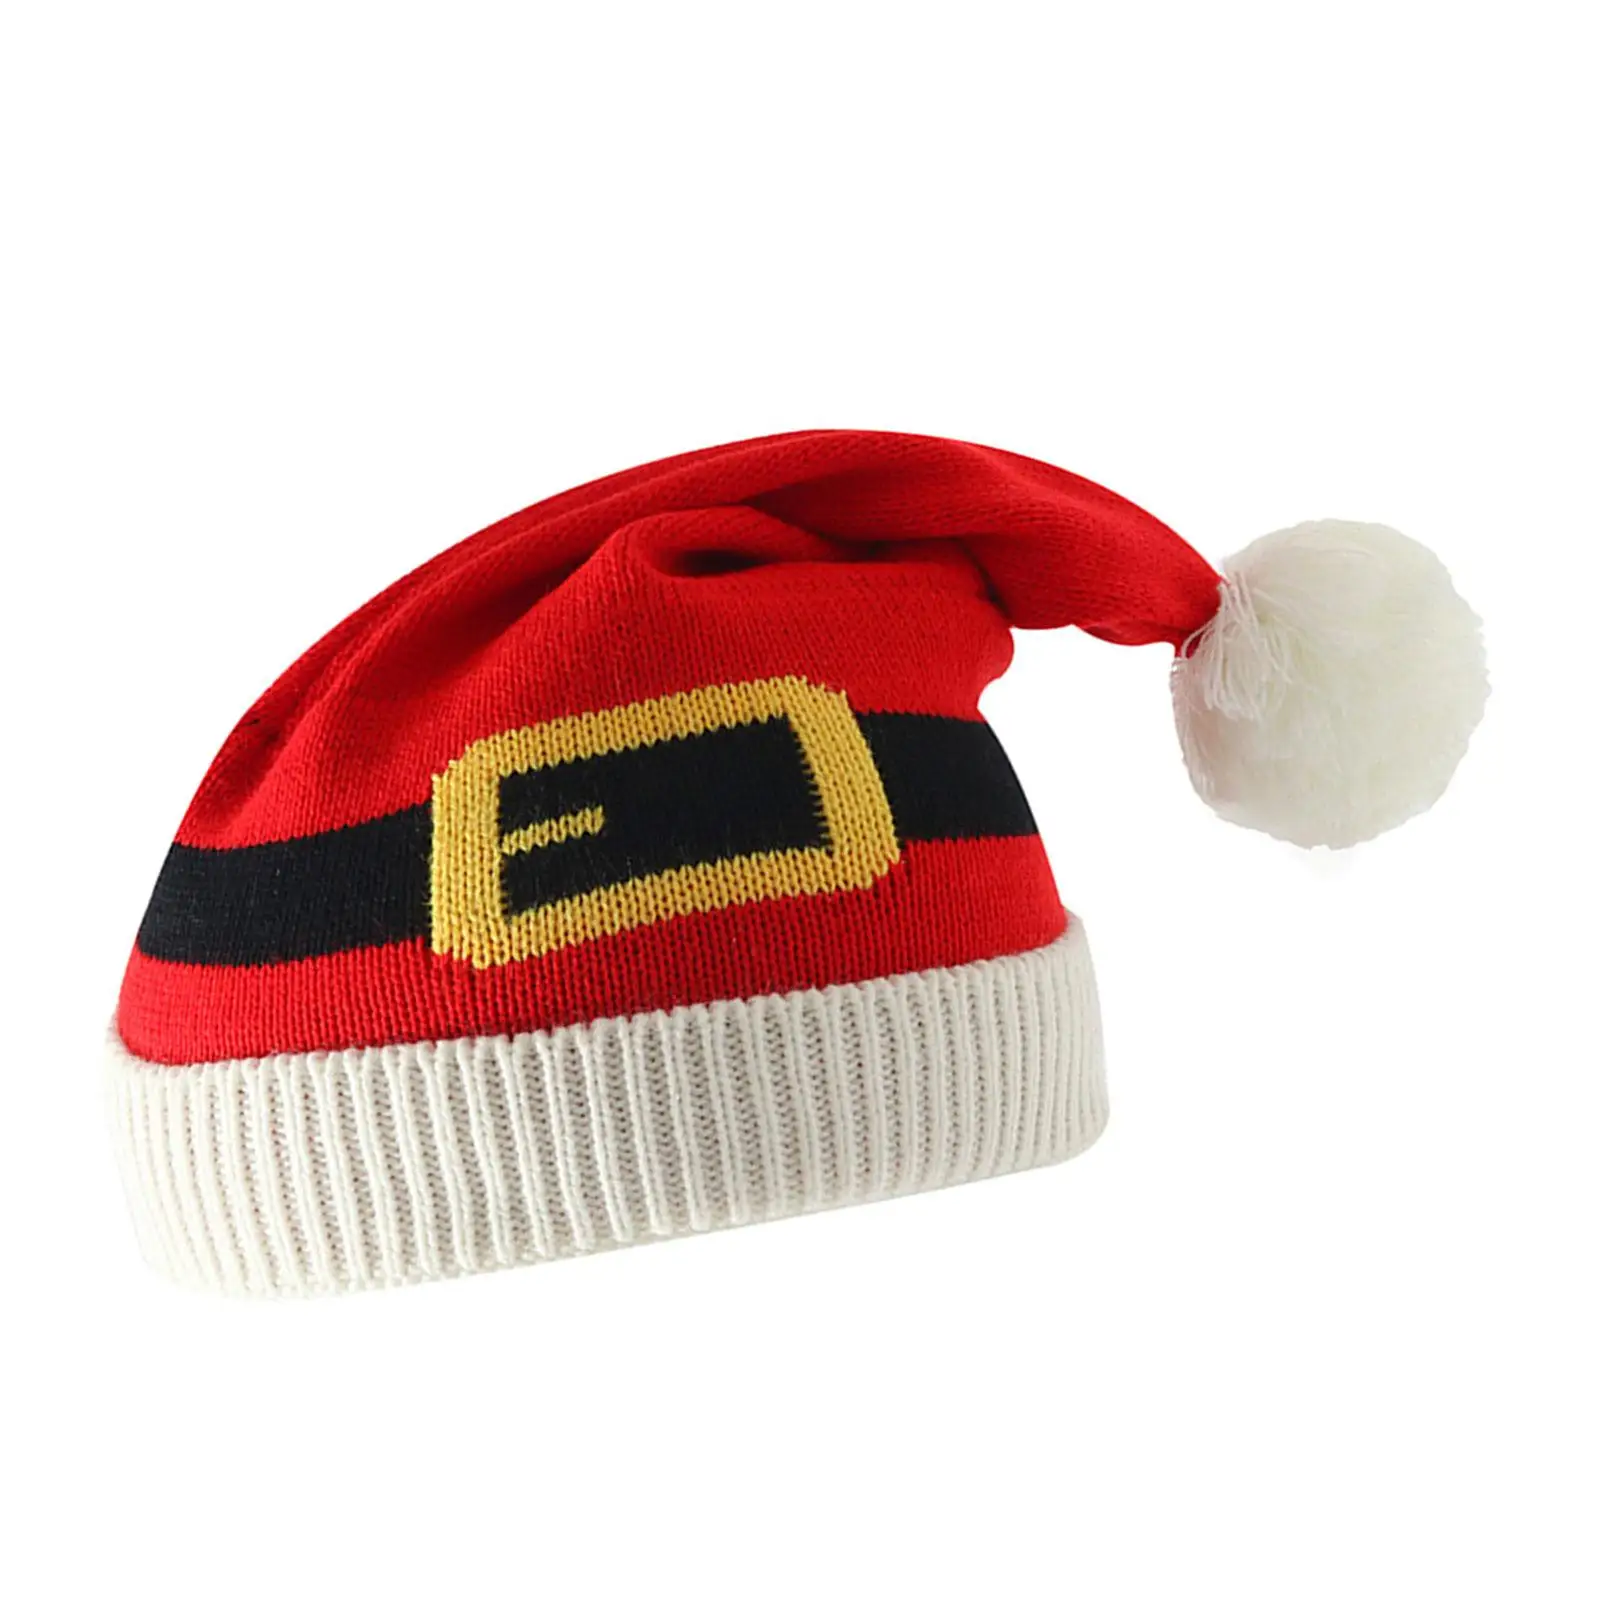 Winter Christmas Knitted Hat Knit Beanie Soft Photo Props Adults Costume Xmas Warm Hat for Carnival Festival Cosplay New Year